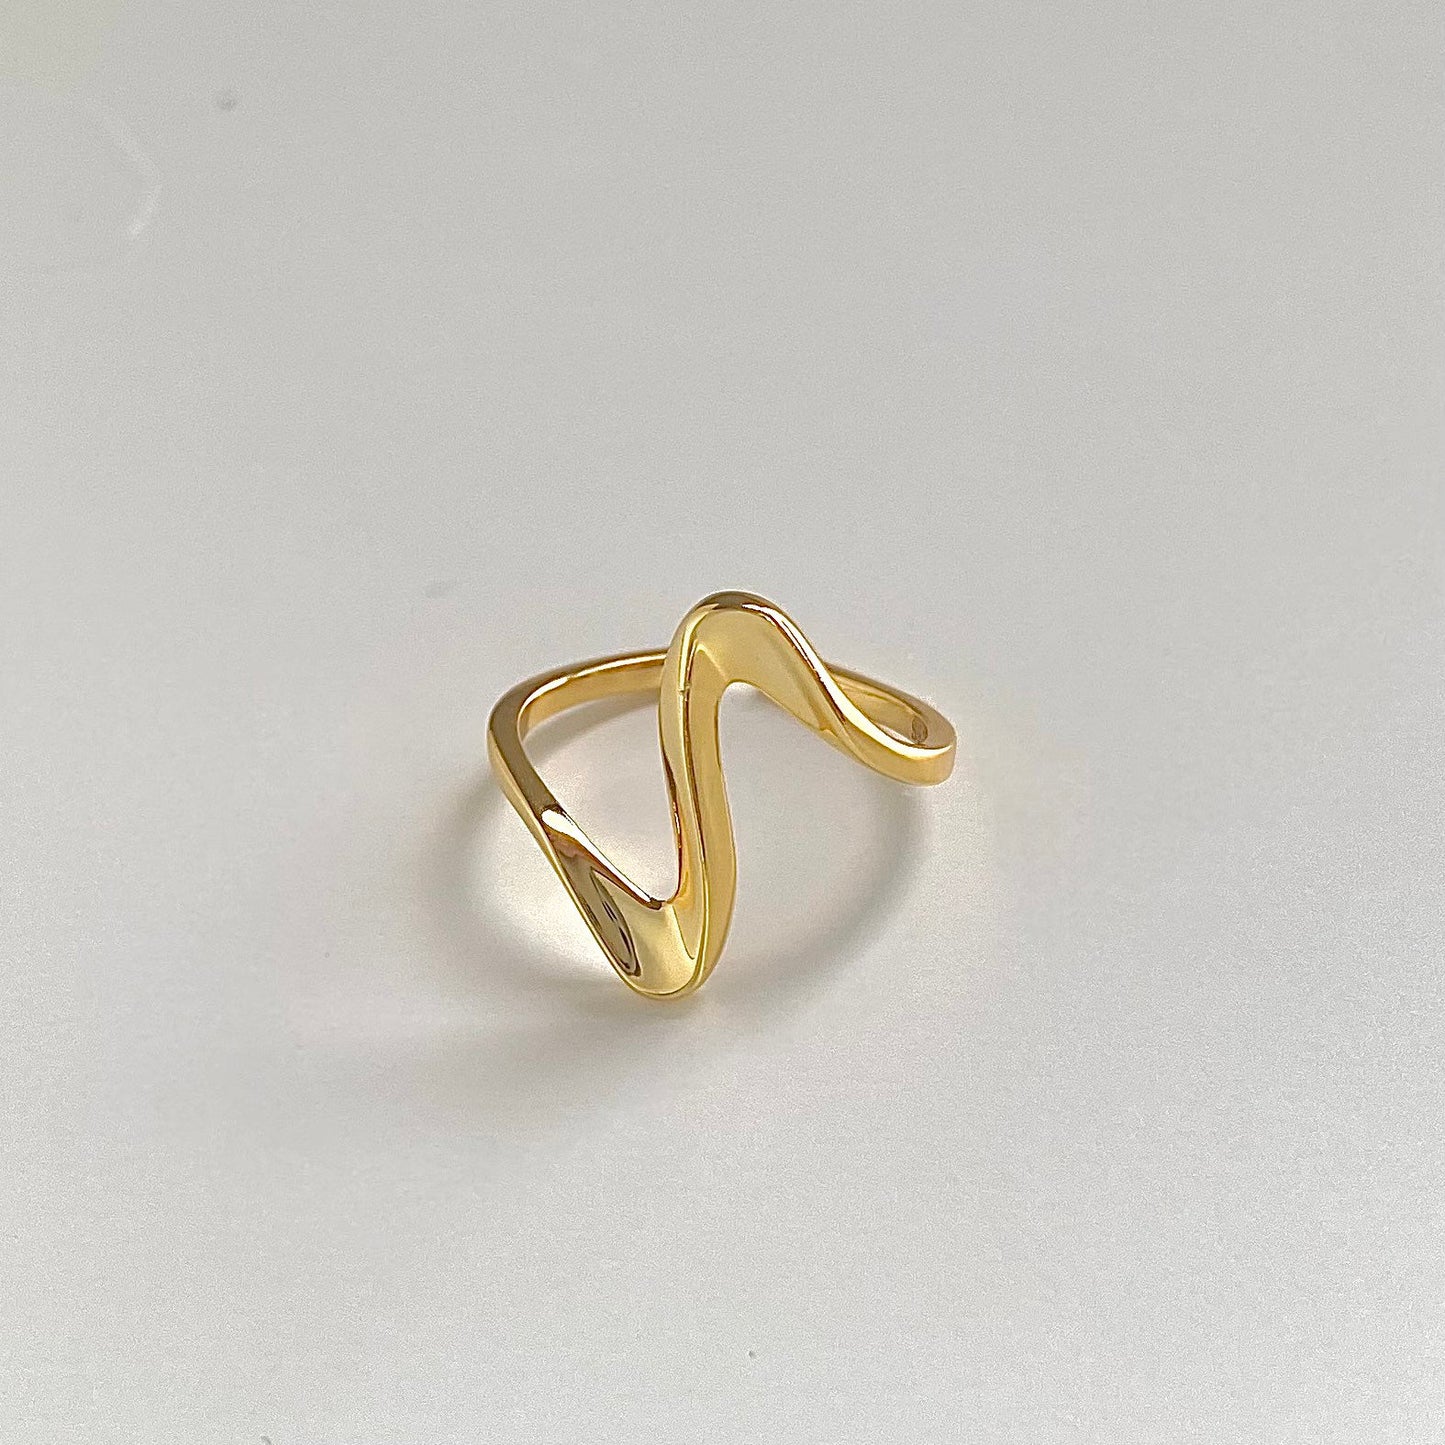 Rhythm of Life 18k Gold Plated S925 Silver Ring